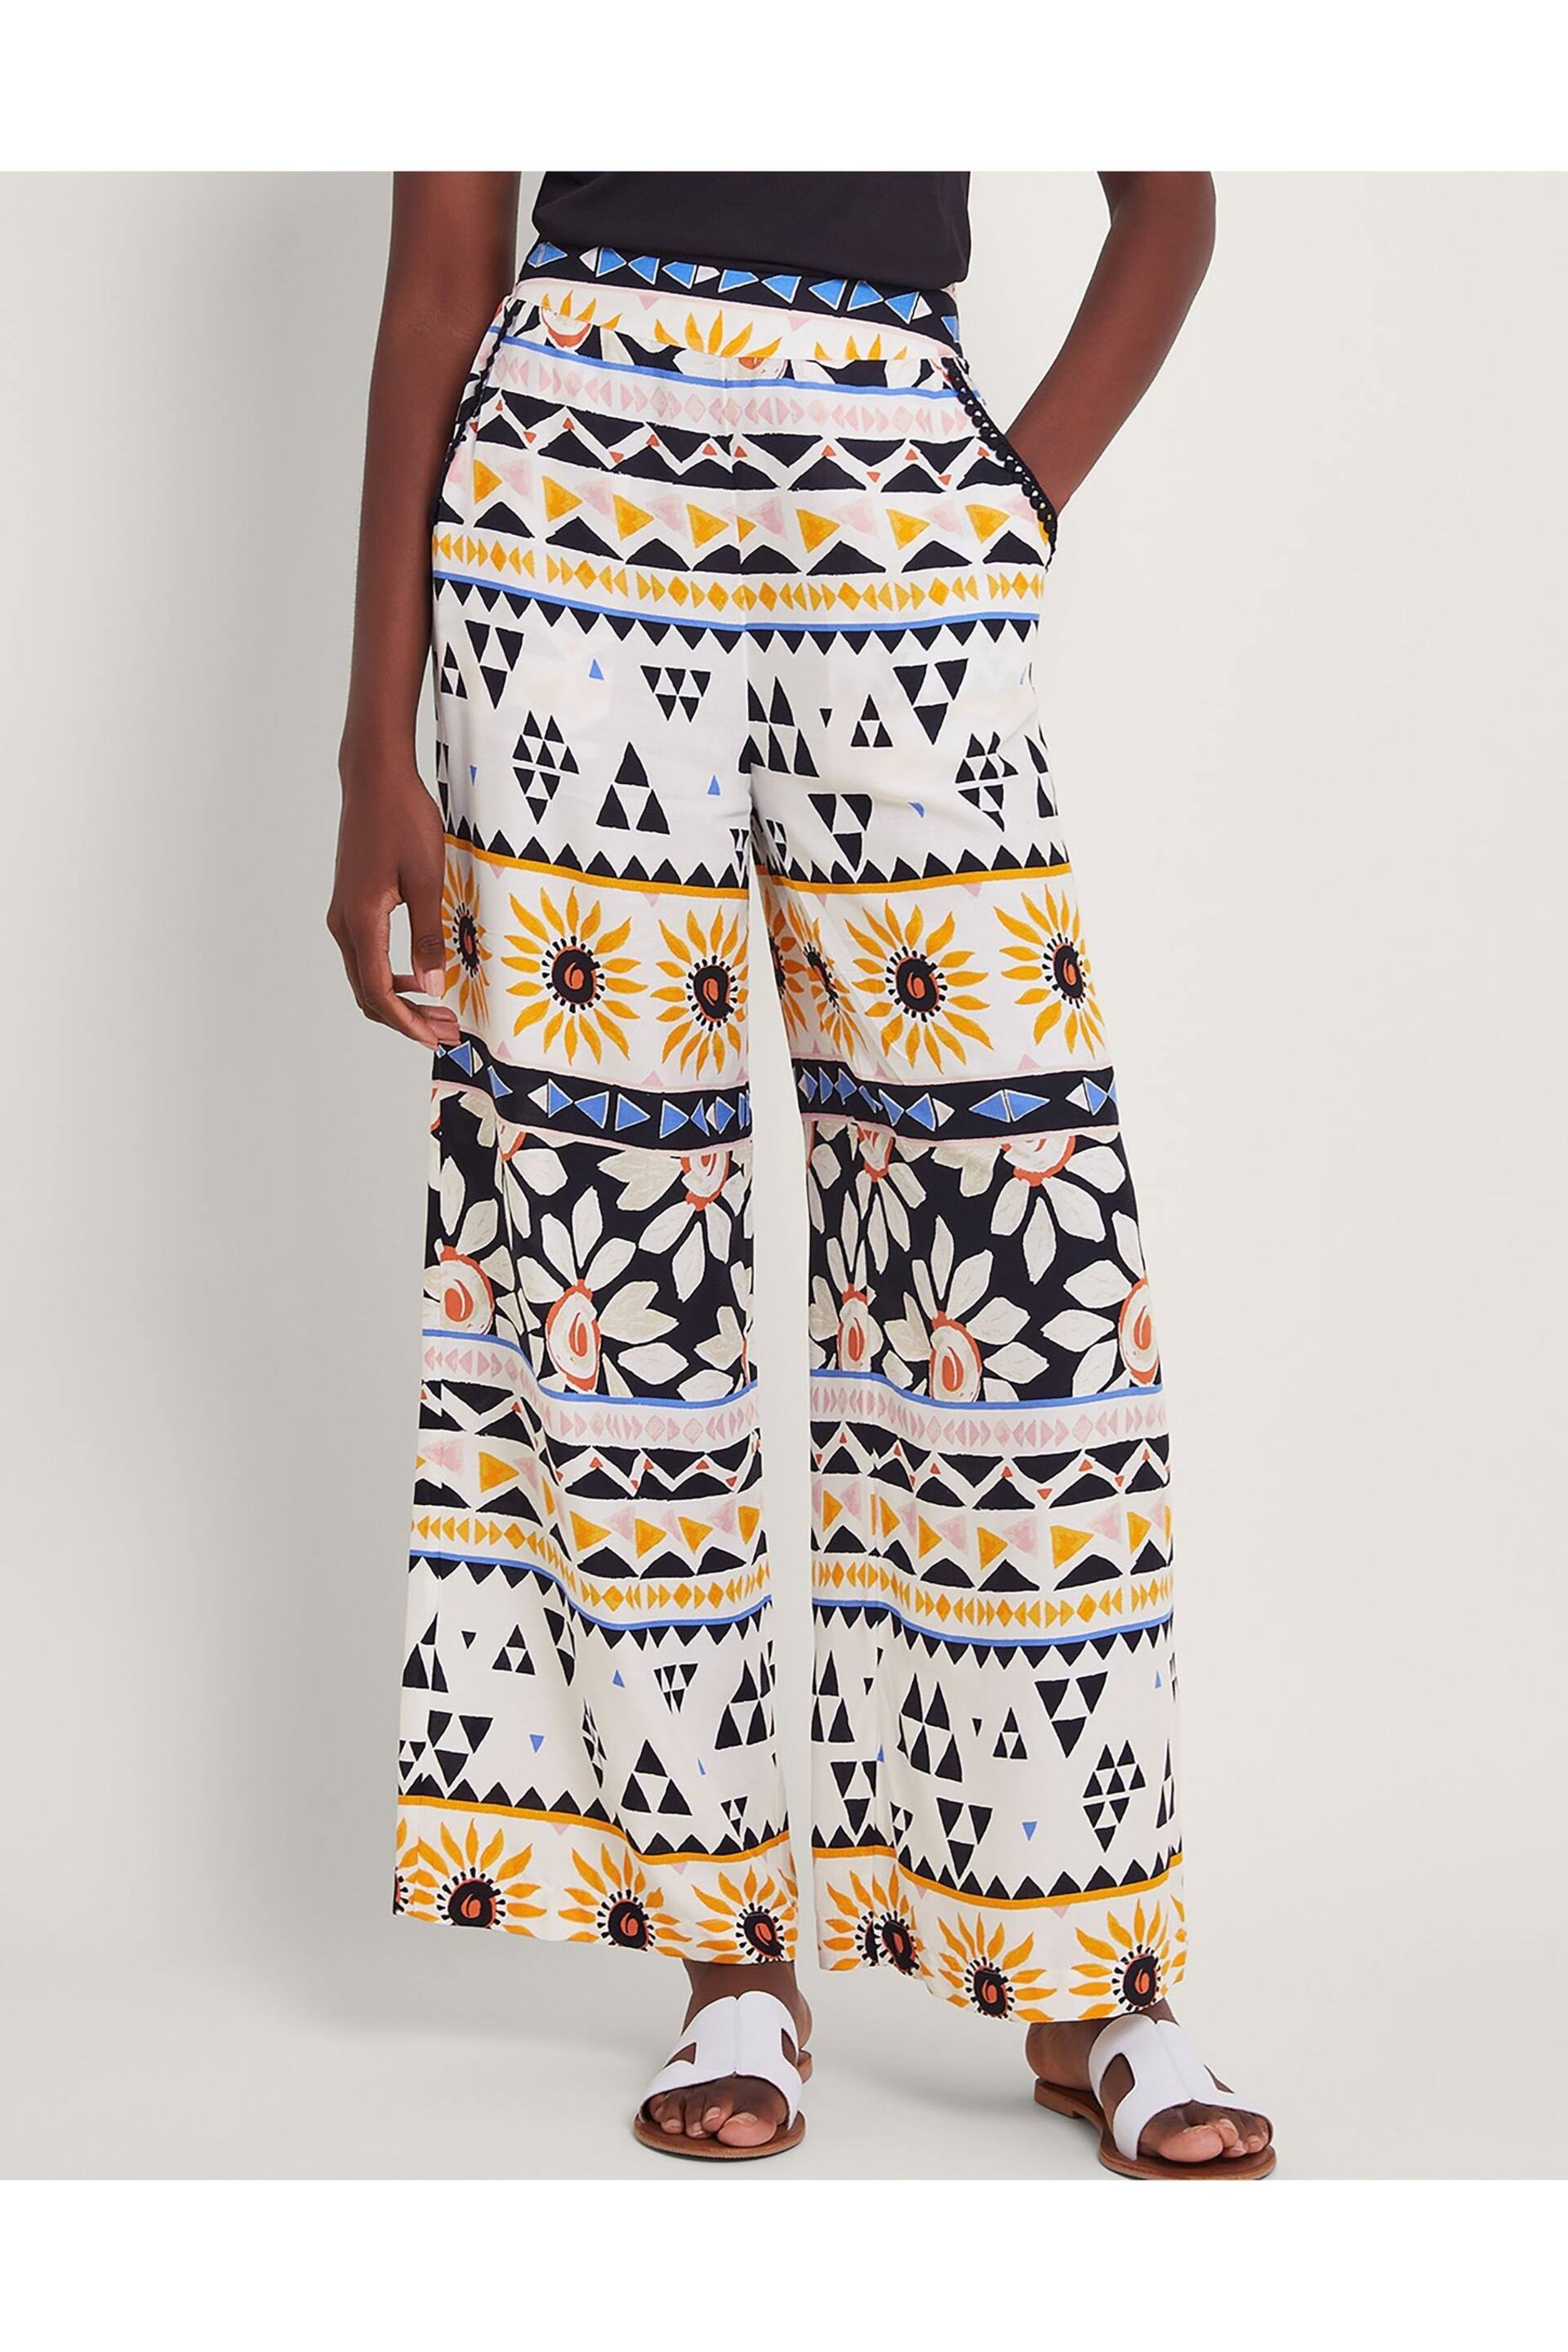 Monsoon Natural Corey Print Trousers - Image 2 of 4